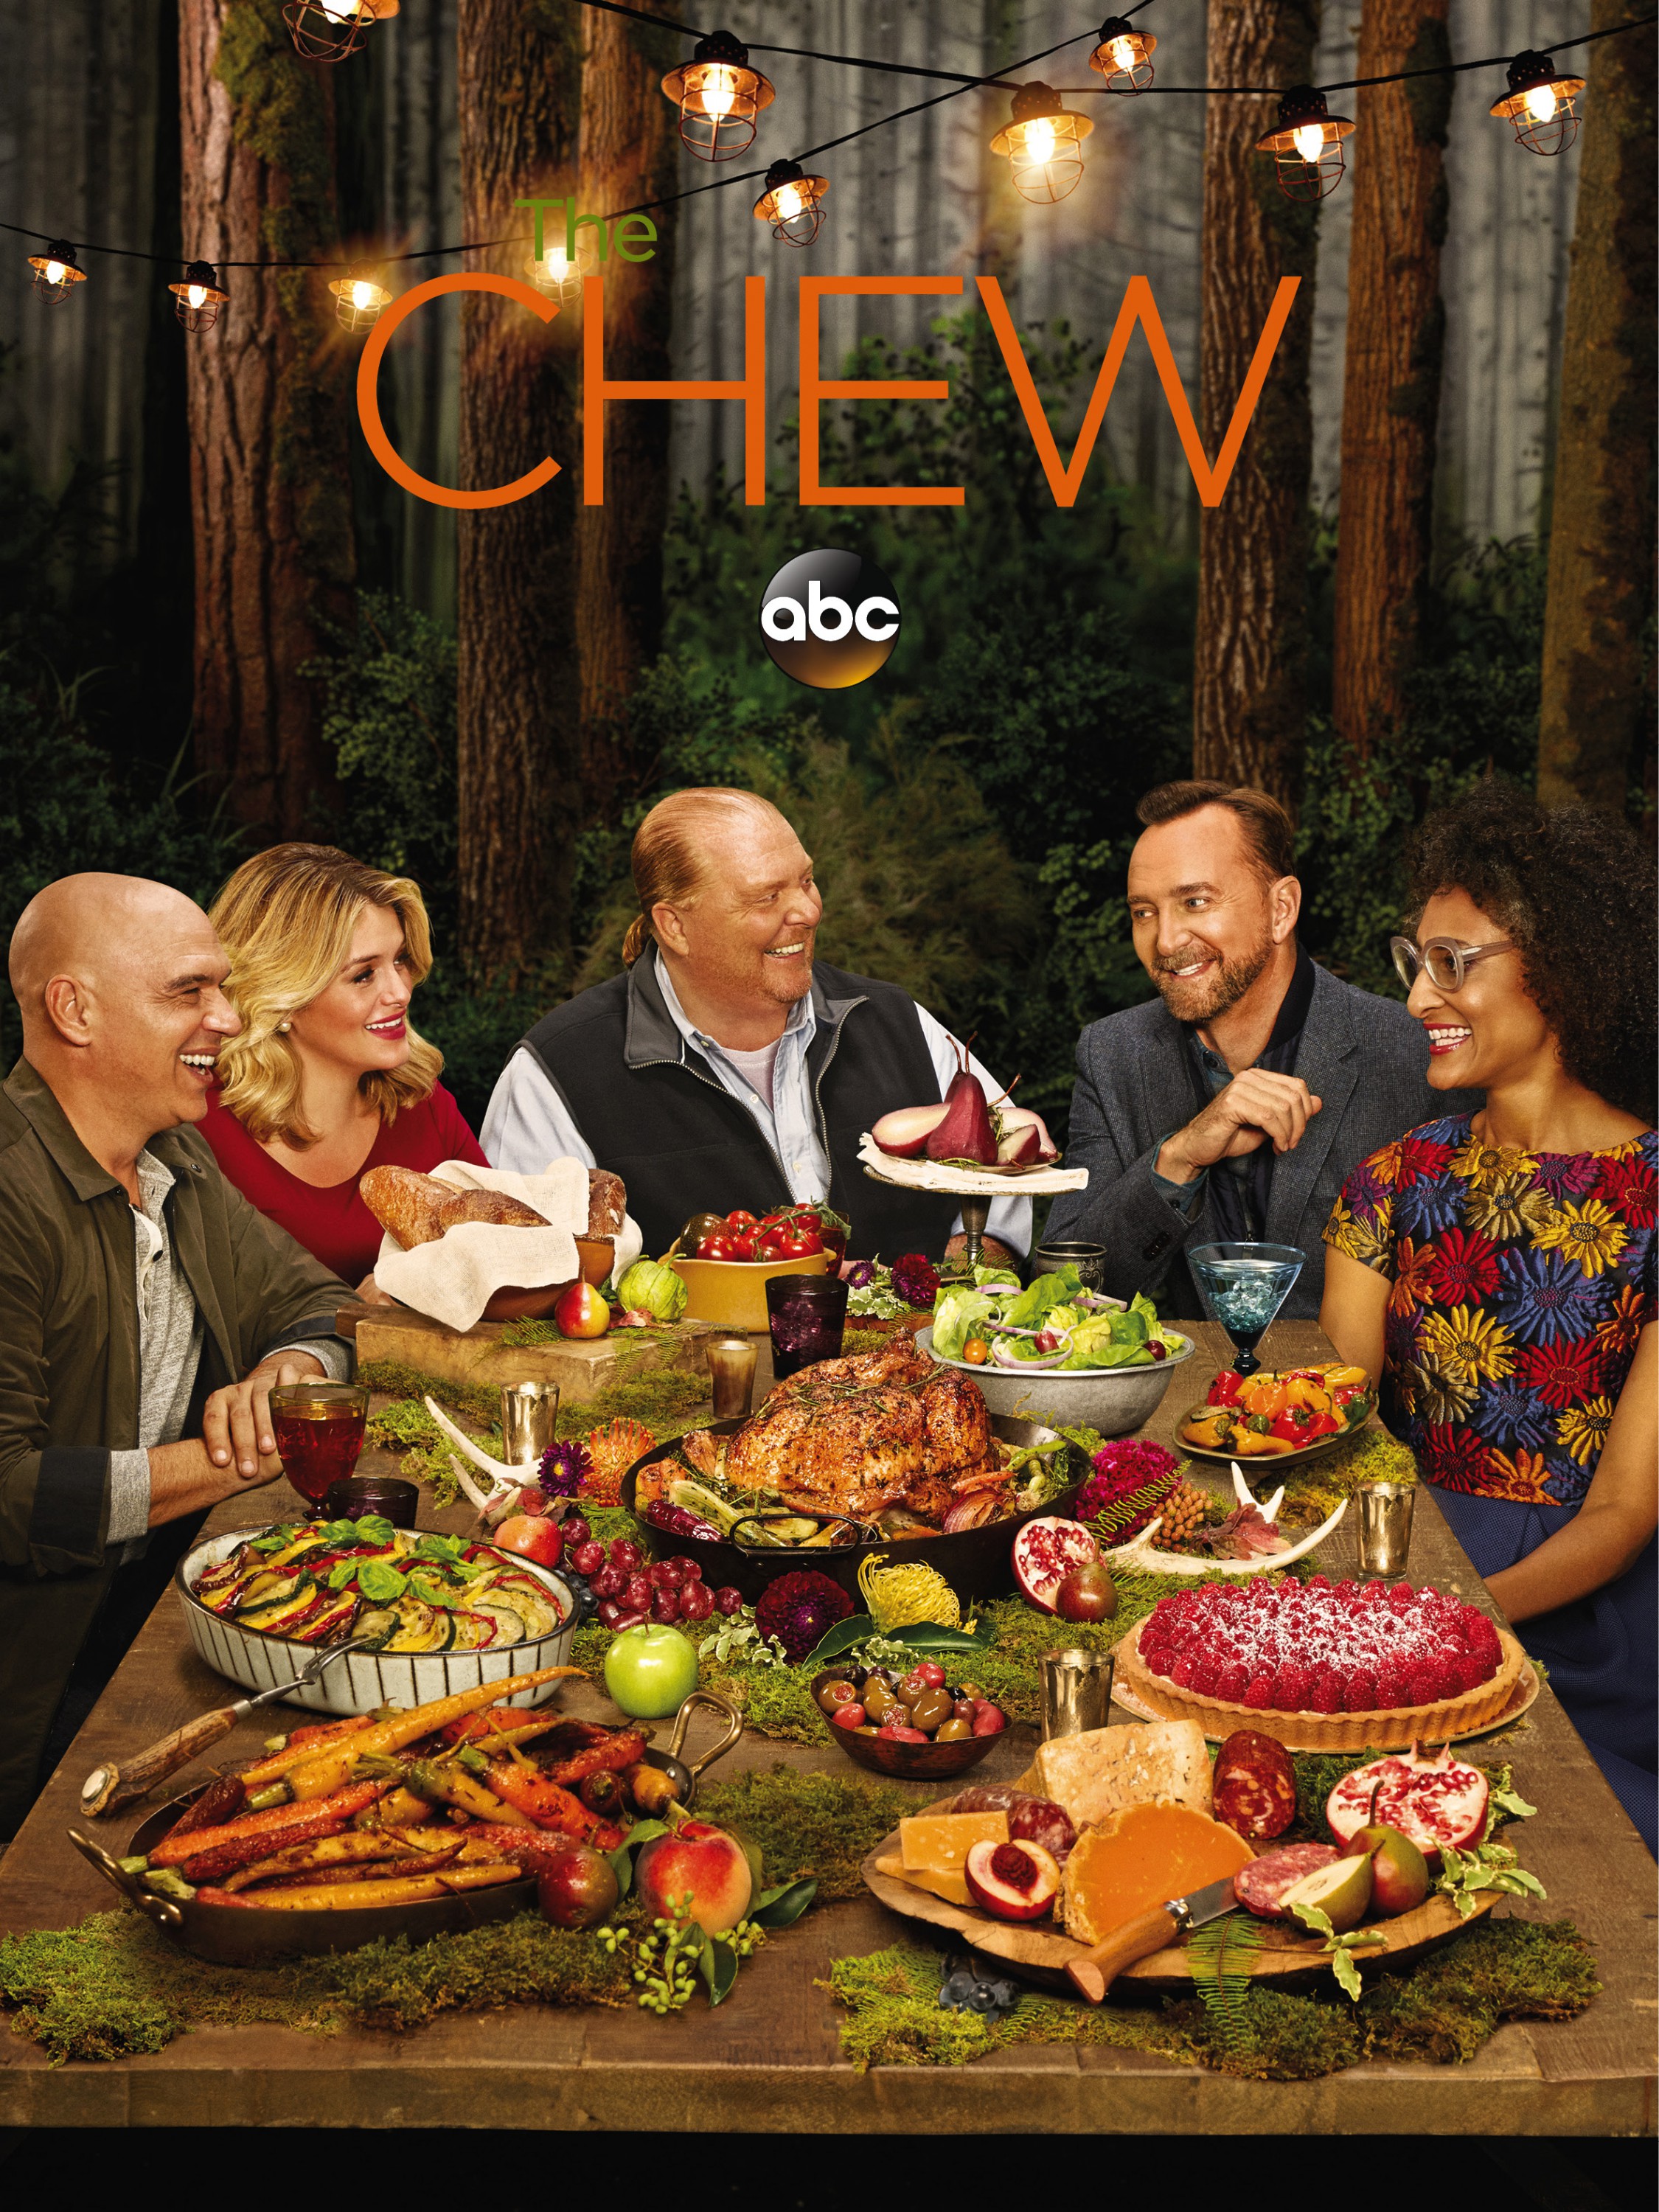 Mega Sized TV Poster Image for The Chew (#4 of 11)